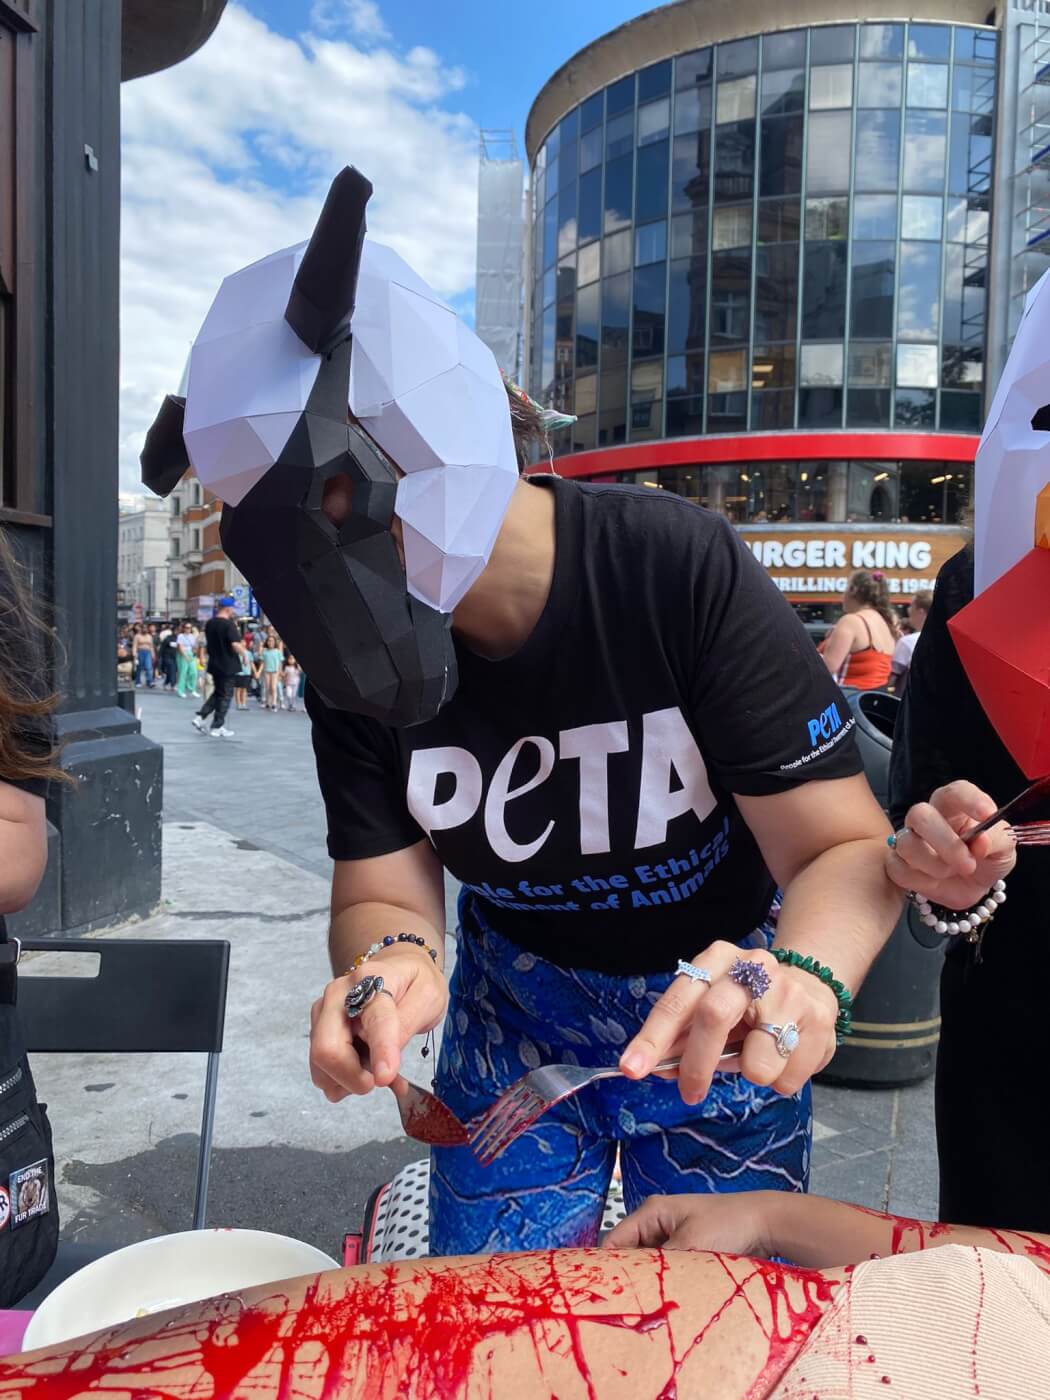 World Day for the End of Speciesism: PETA 'Animals' Feast on 'Human Flesh'